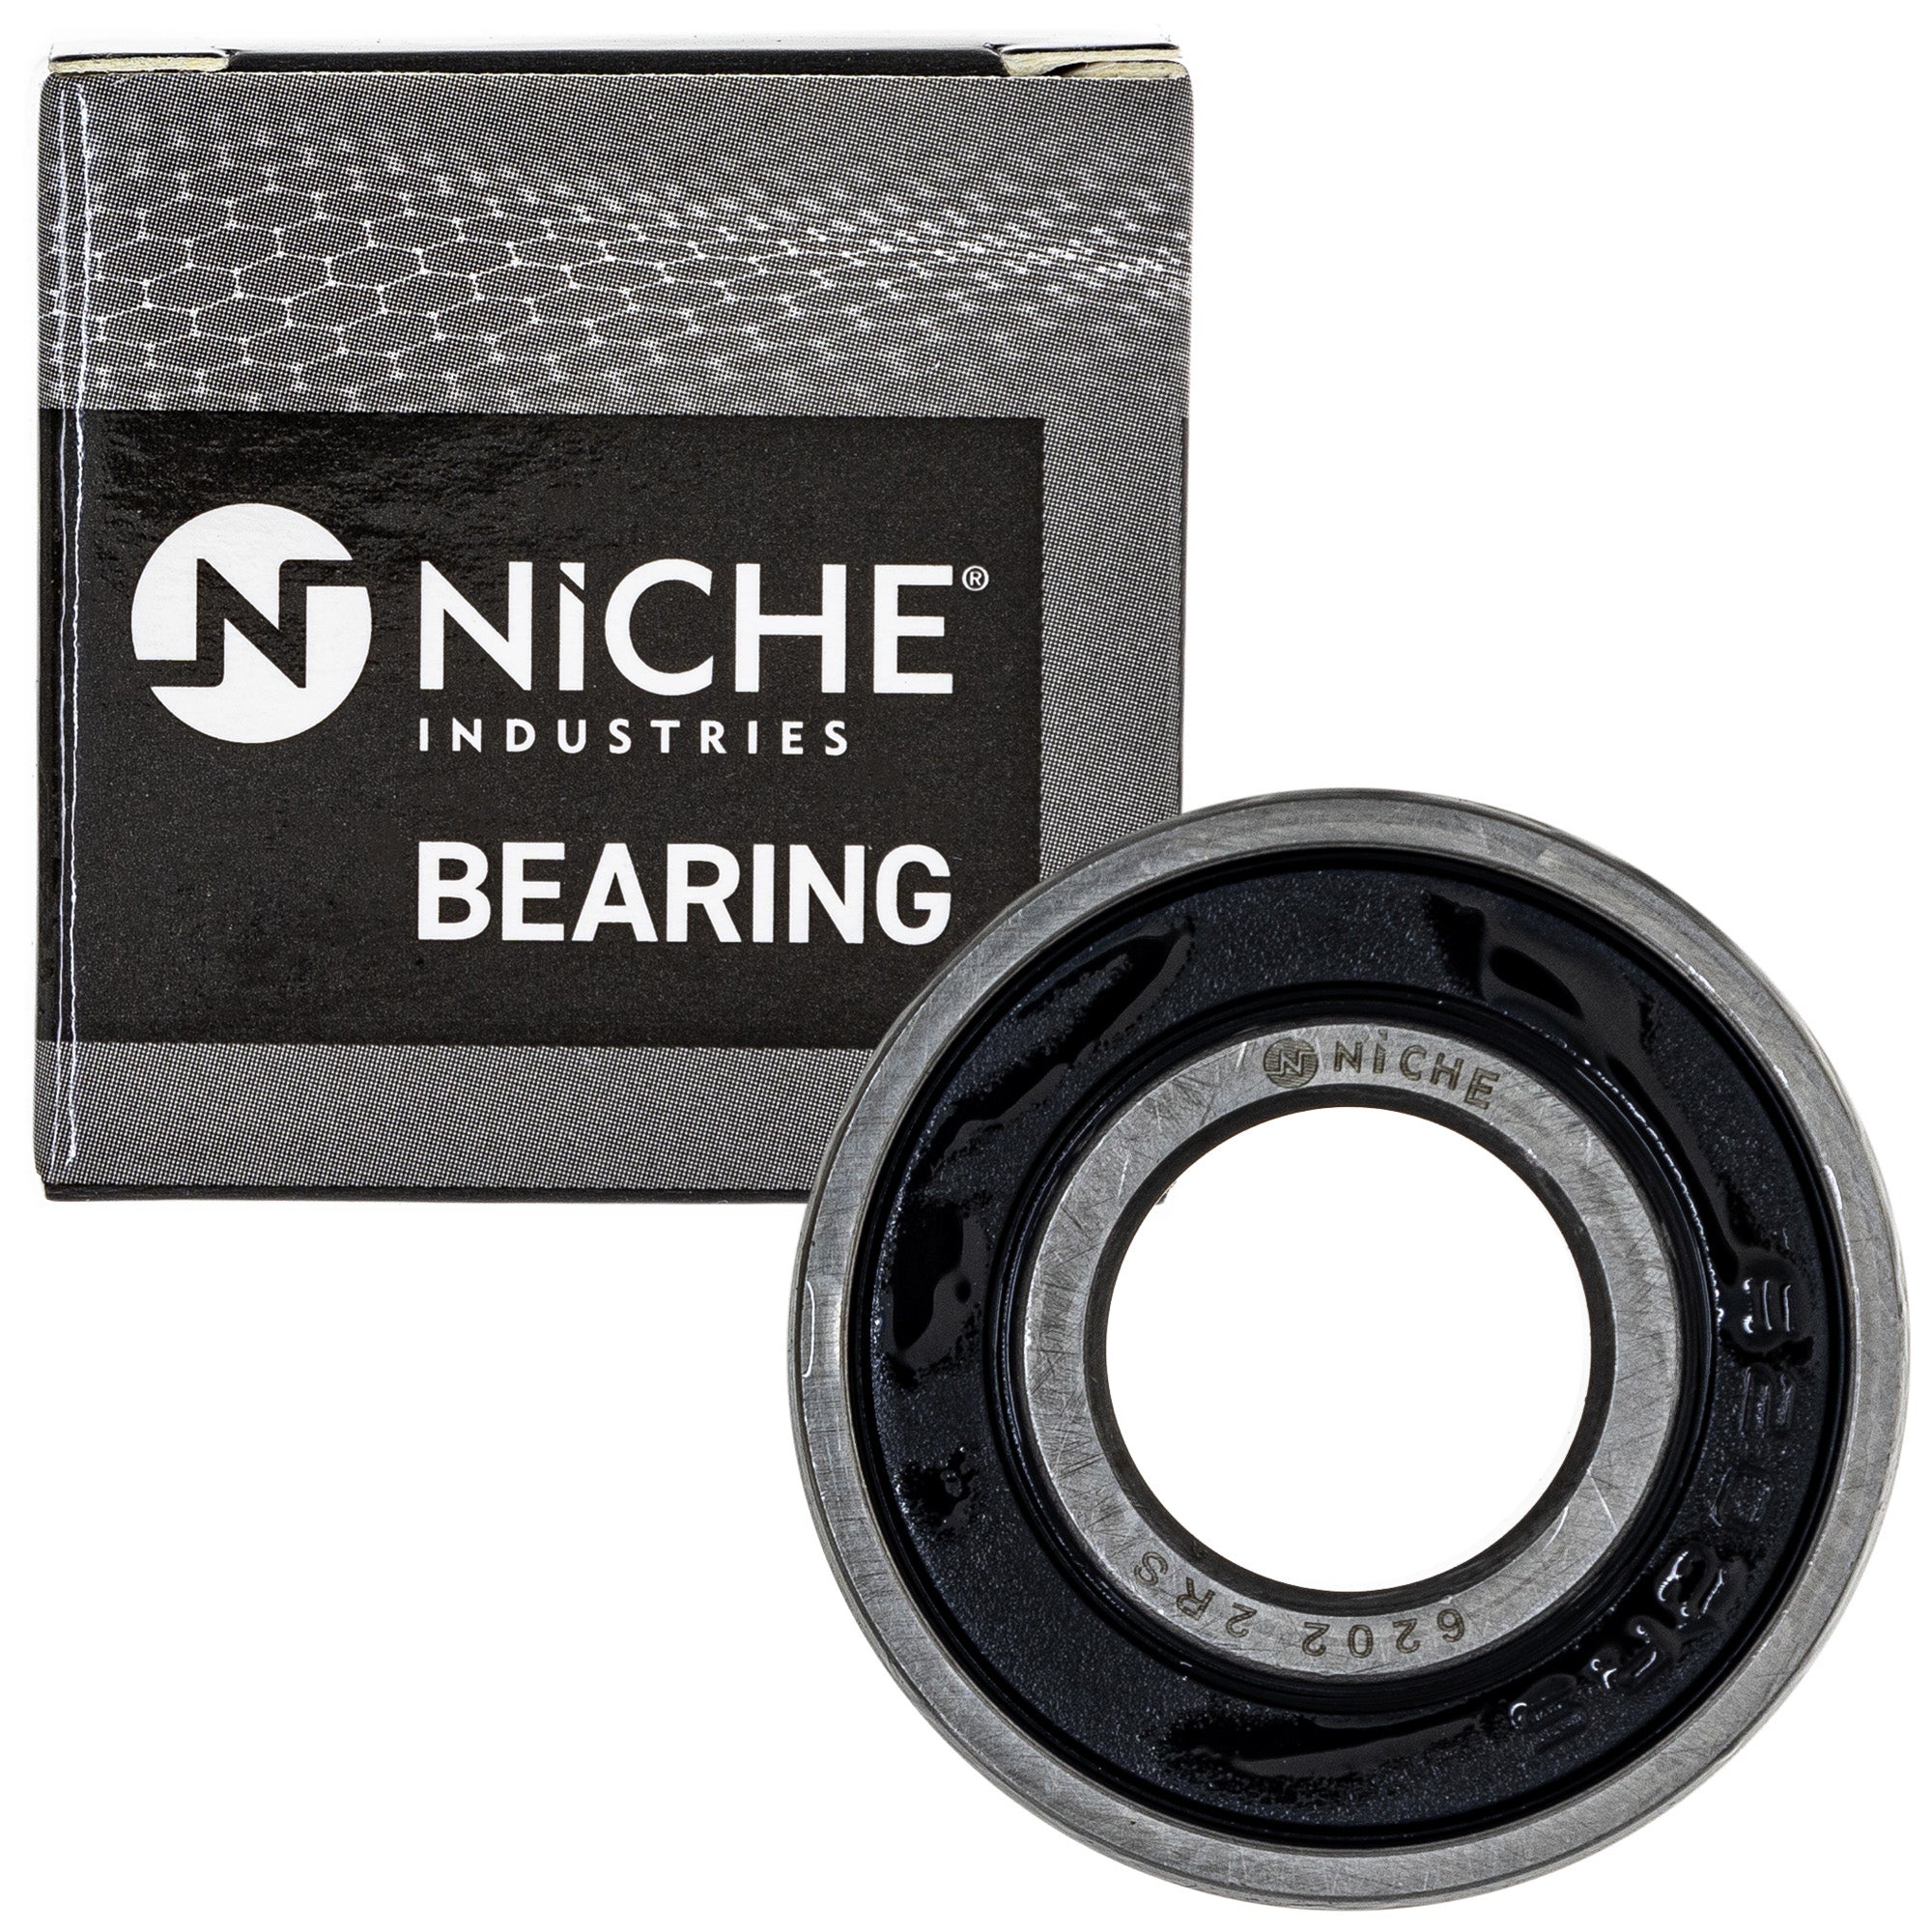 NICHE MK1009109 Wheel Bearing Seal Kit for zOTHER Ref No Elsinore